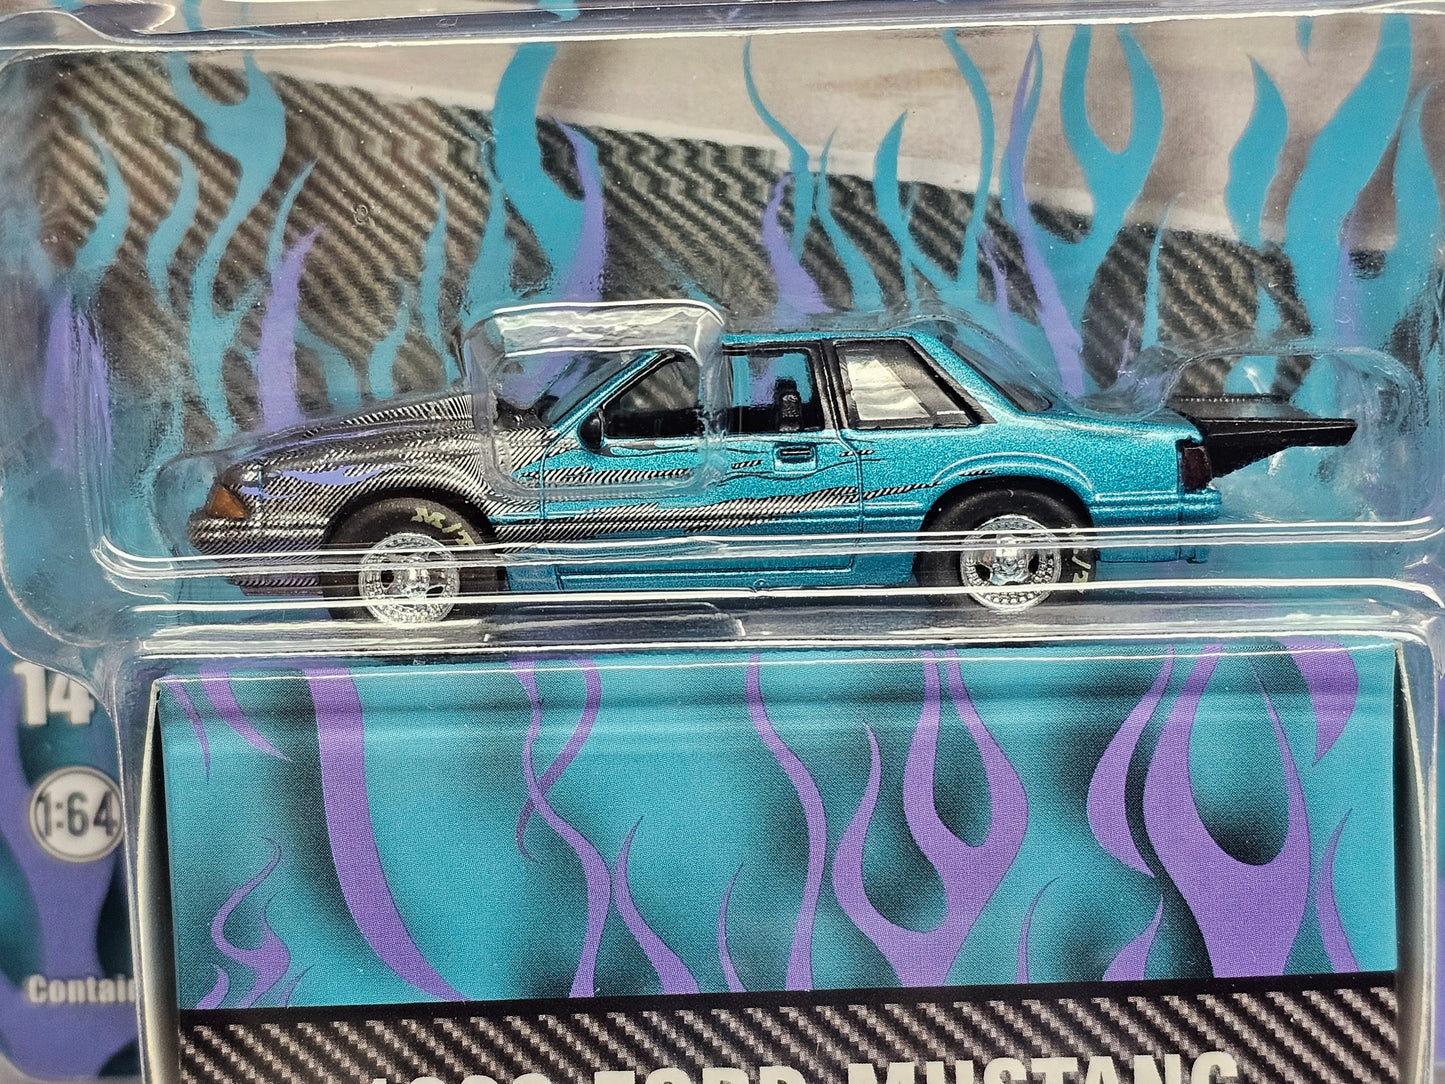 "Turbo AWD" Mustang GreenLight Collectibles WRAPS 1990 Ford Mustang Store Exclusive